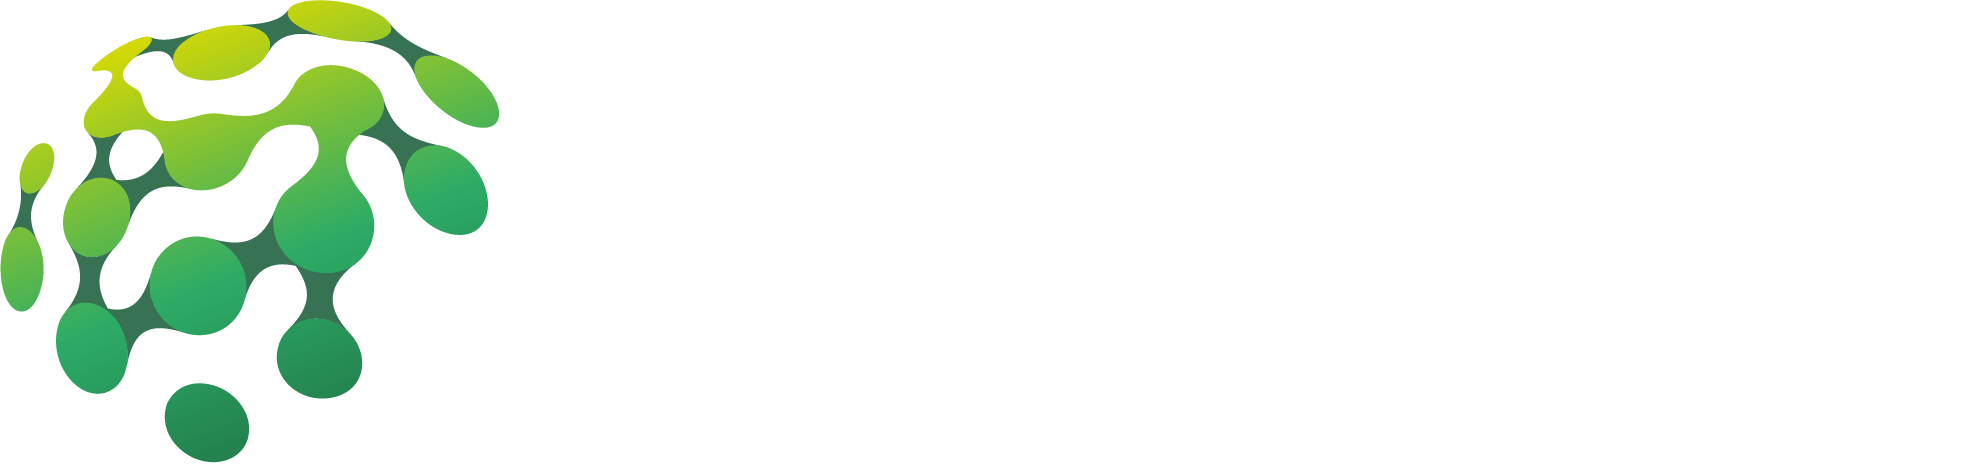 HUB Healthcare logo alongside a screen showing compliance management systems on the platform, underscoring its HIPAA-compliant and free healthcare solutions.